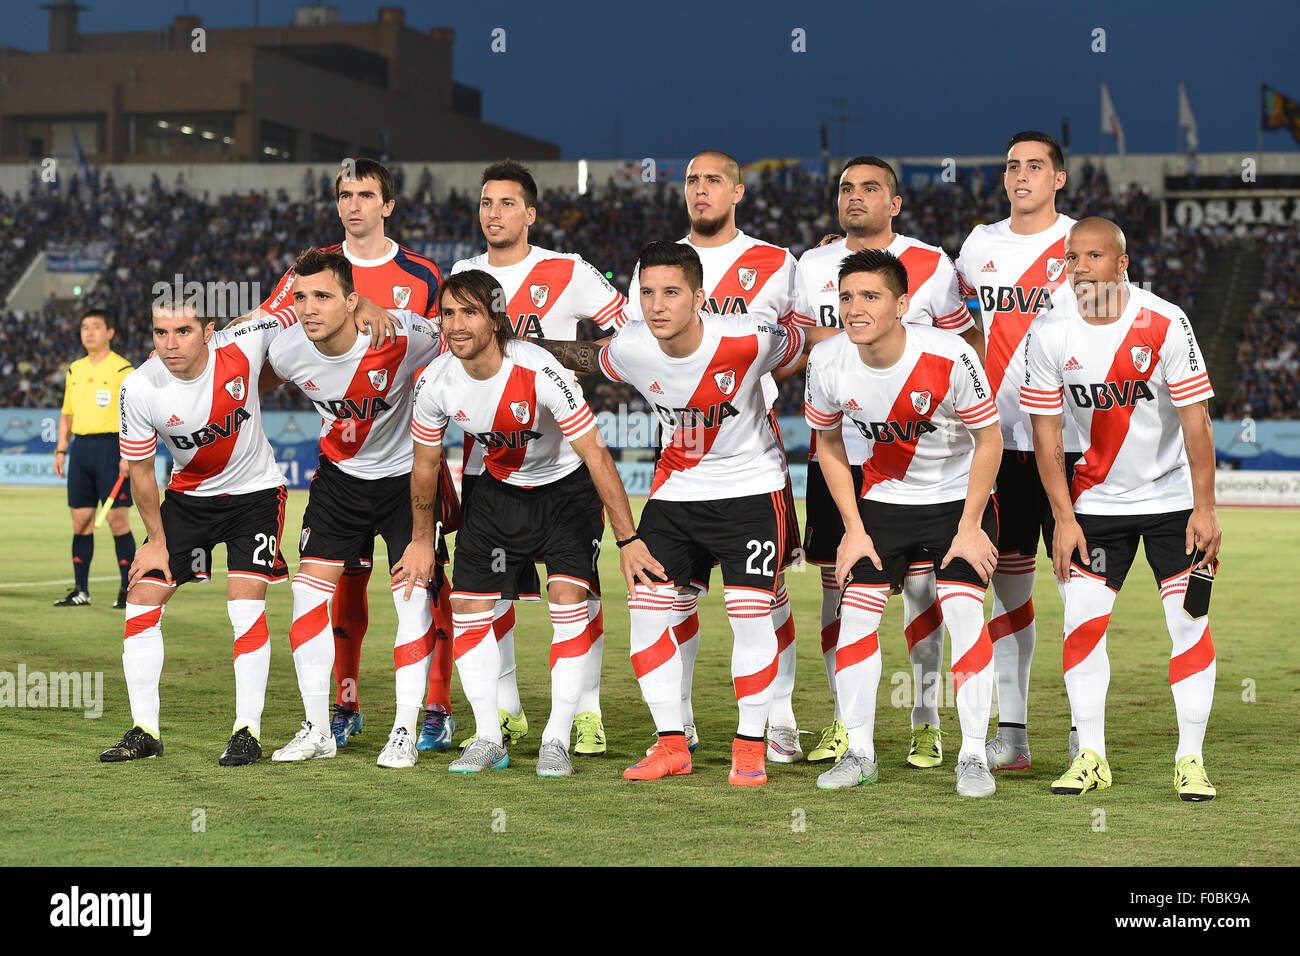 River Plate team group Line-up (River), August 11, 2015 - Football / Soccer  : SURUGA bank Championship 2015